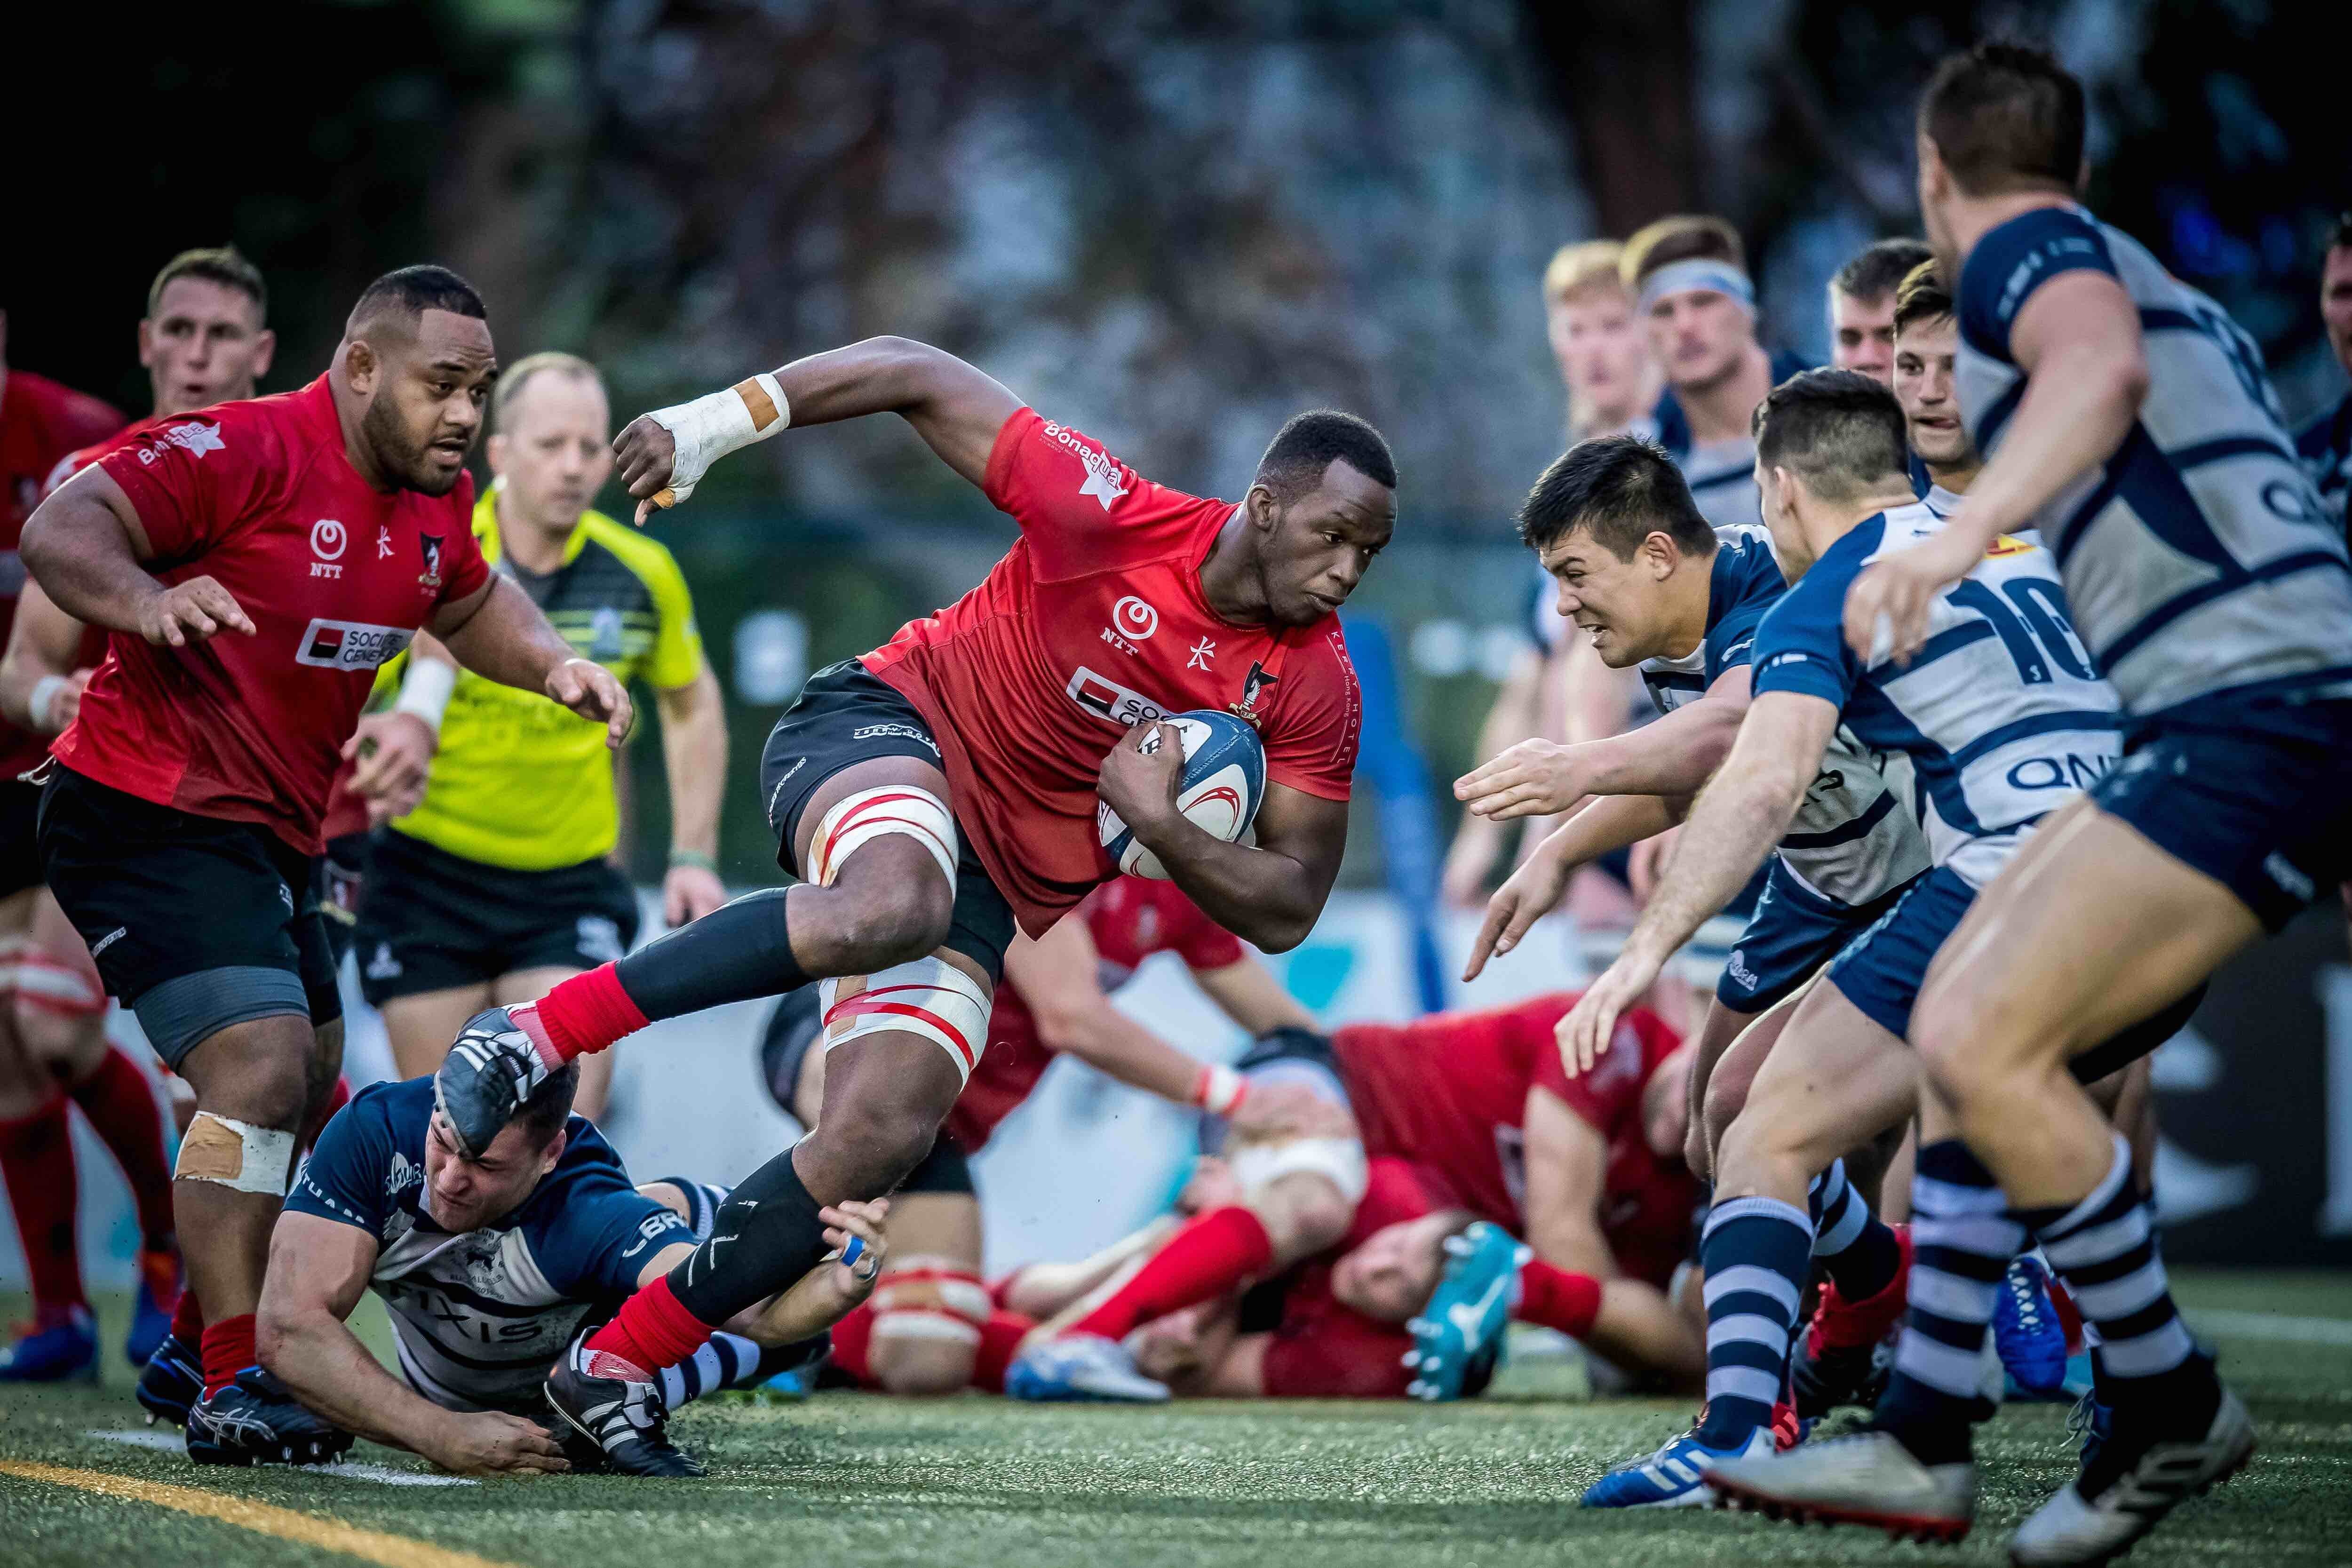 Natixis HKFC against Societe Generale Valley during the 2019-20 Premiership grand championship final at King’s Park Sports Ground on February 8, 2020. Photo: Ike Li/Ike Images